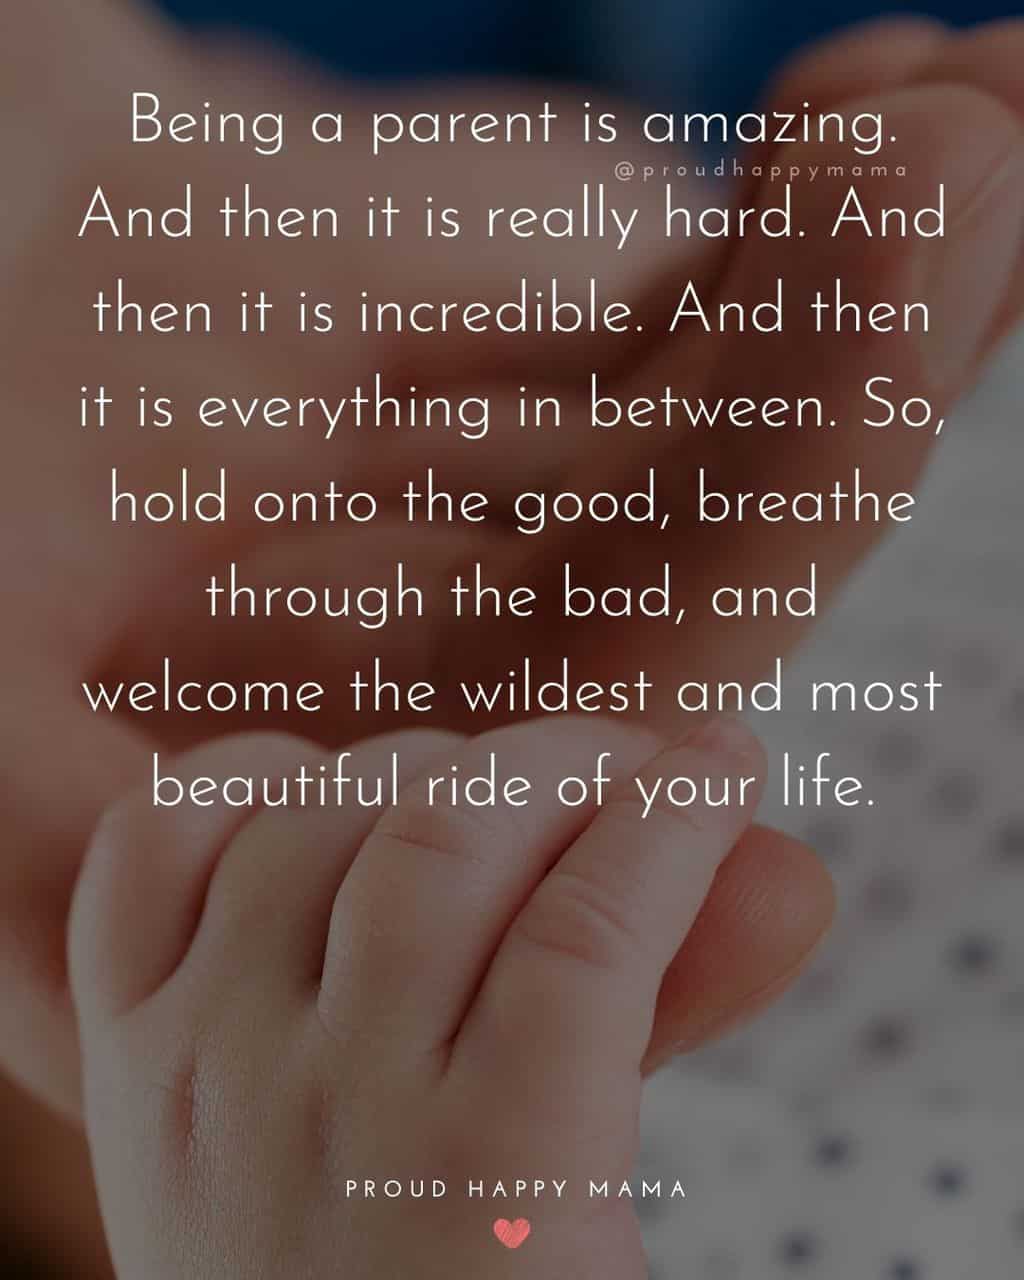 Parenting Quotes - Being a parent is amazing. And then it is really hard. And then it is incredible. And then it is everything in between. 